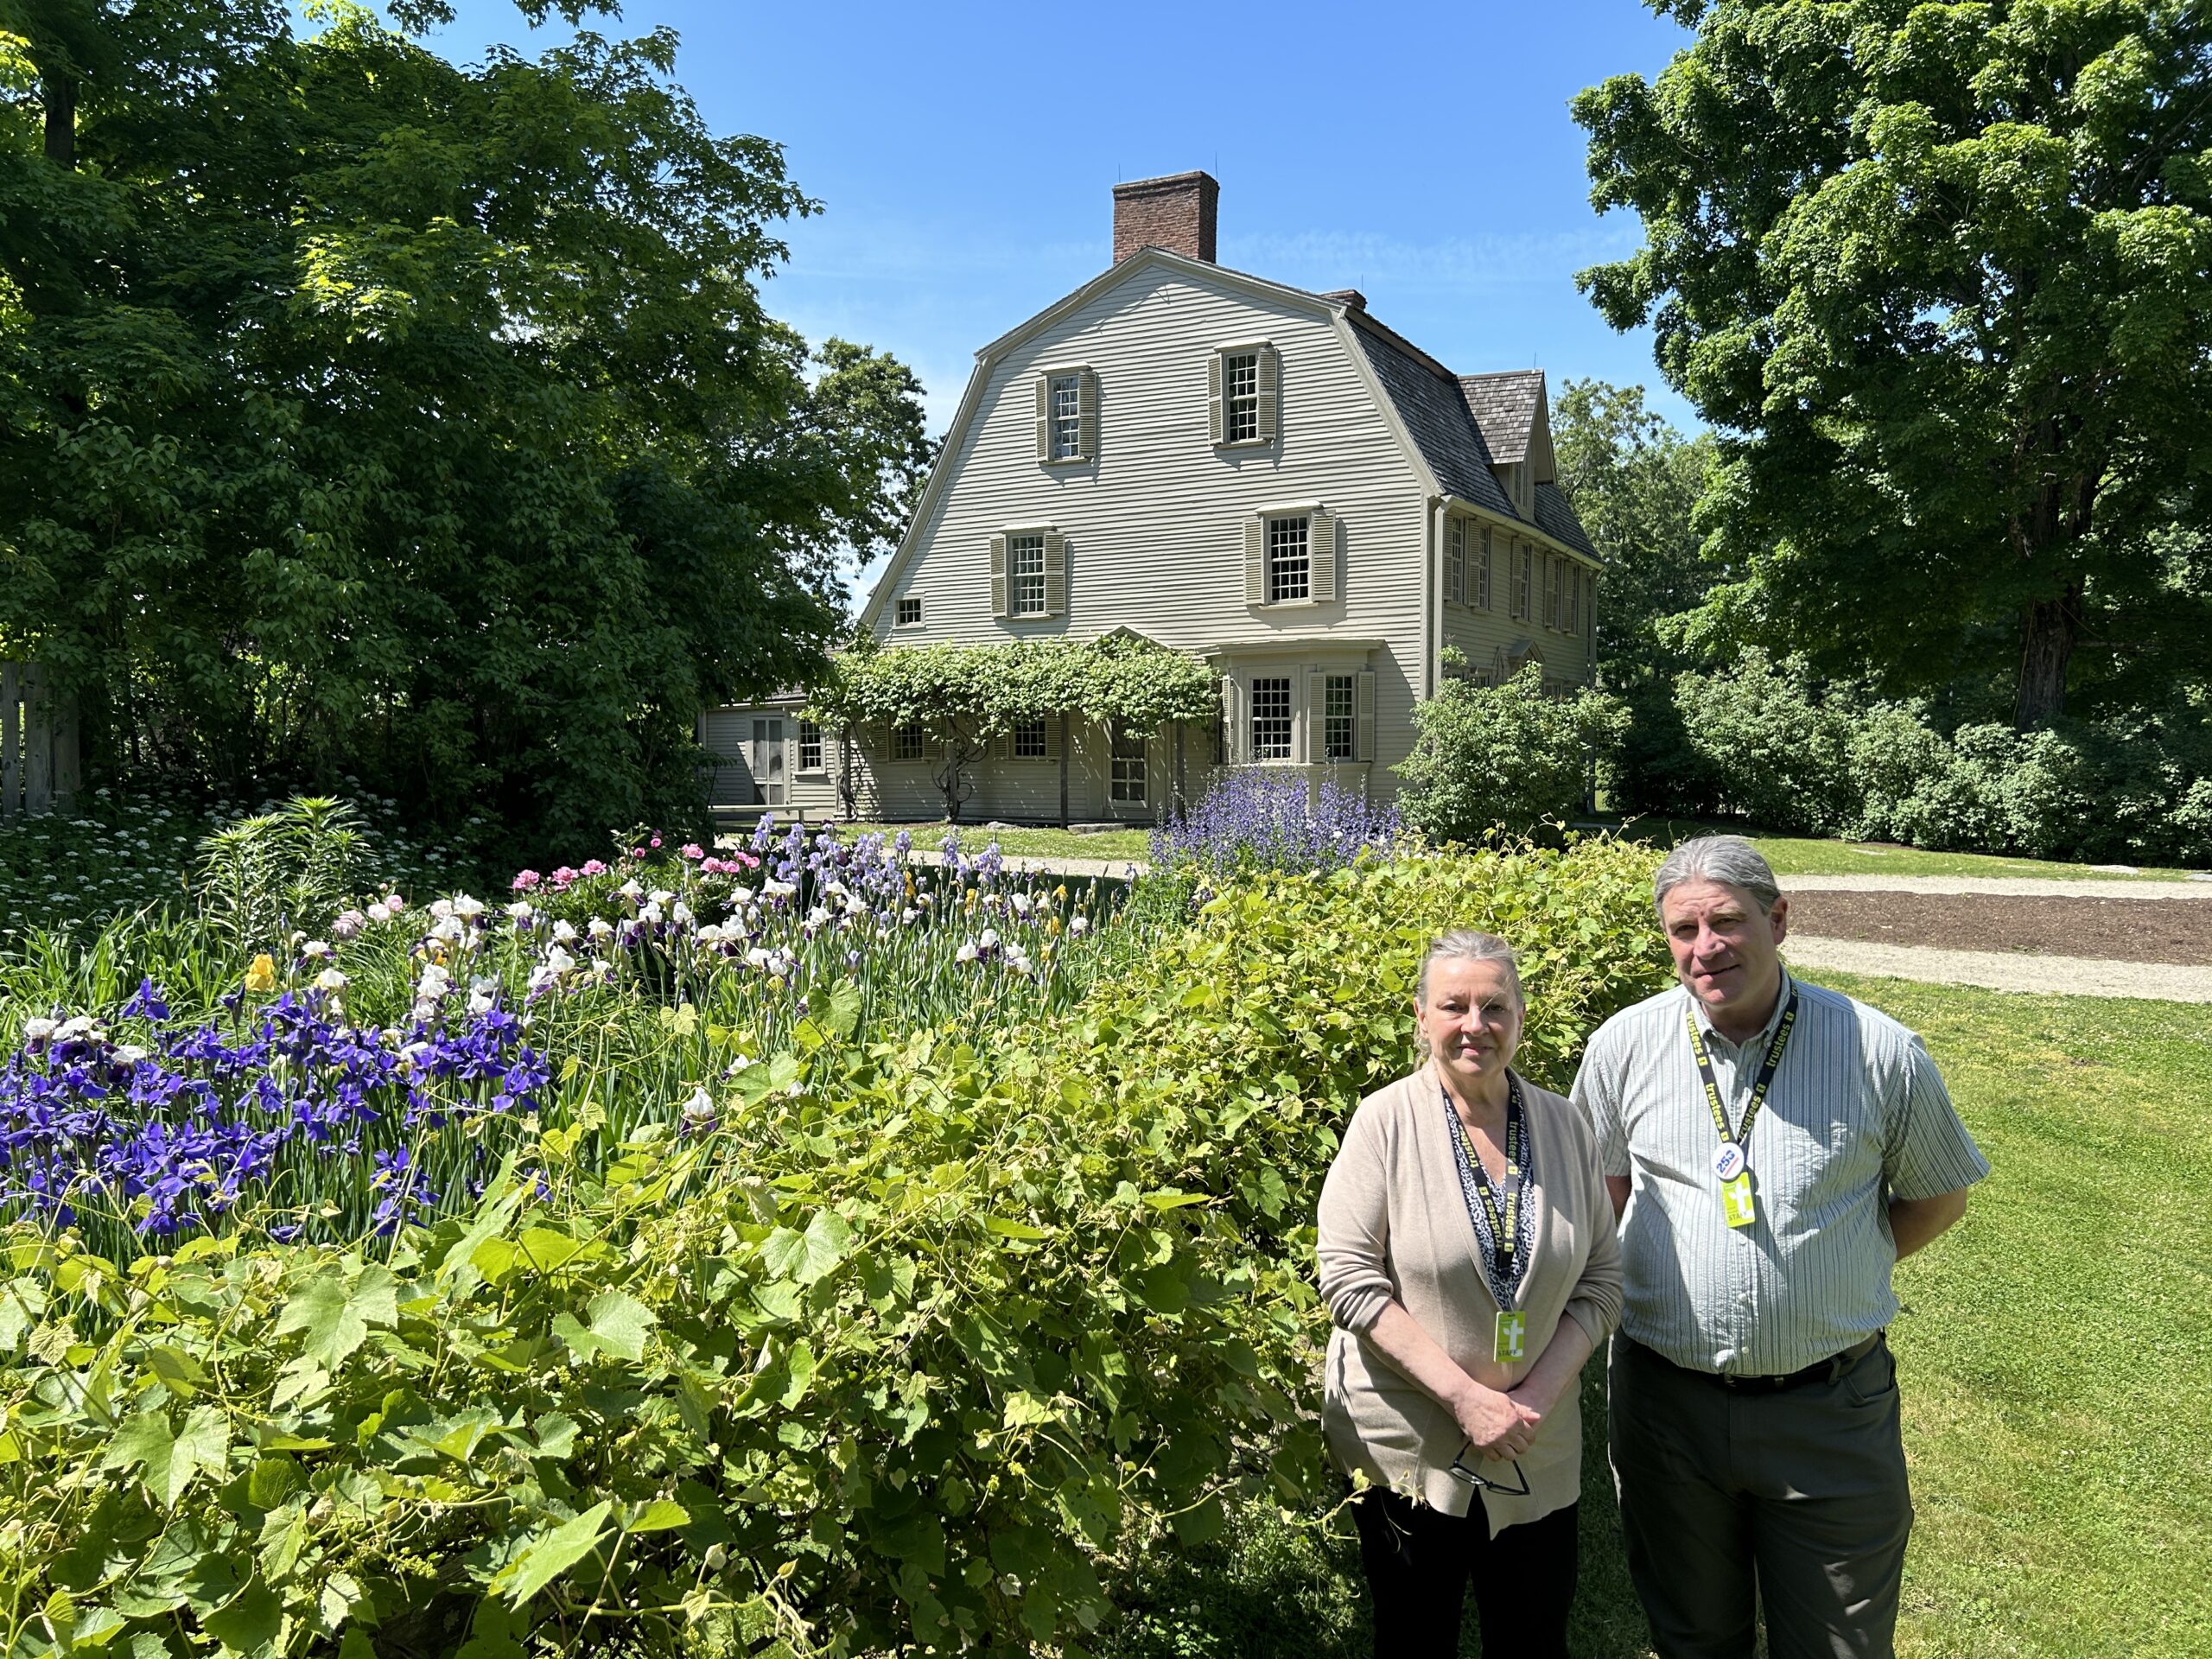 Marybeth Kelly, Trustees Lead Historic Interpreter, and Richard Piccarreto, Cultural Site Interpreter, at The Old Manse.